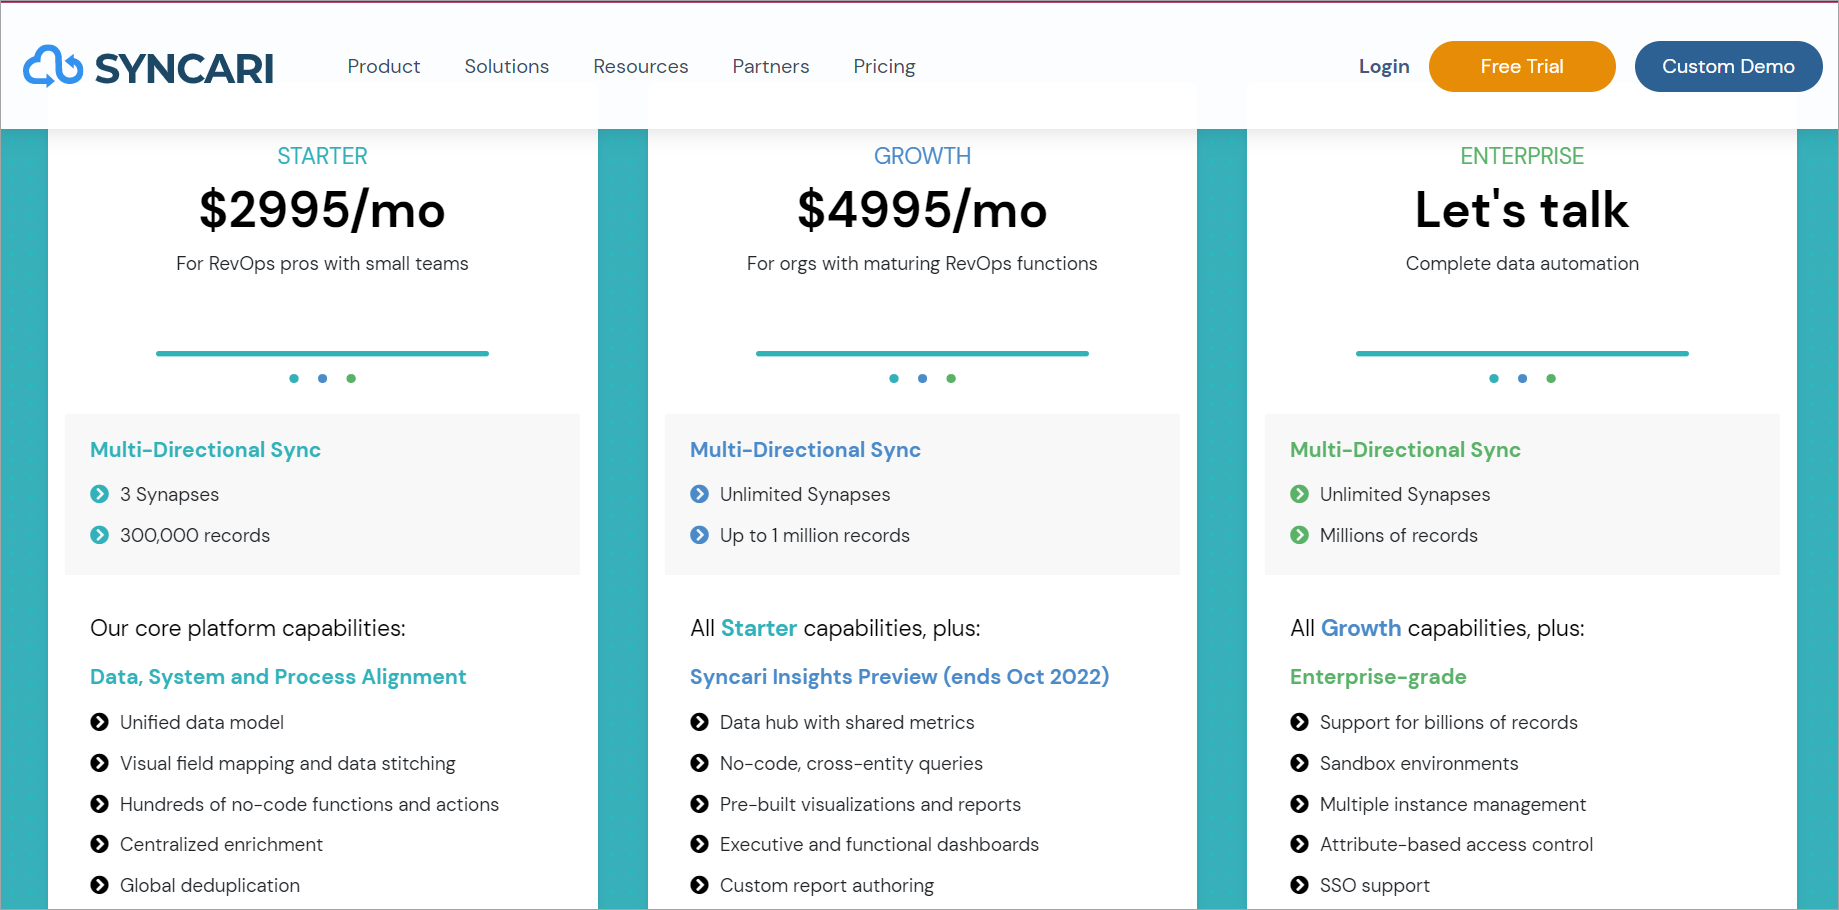 For Syncari, there are four pricing ranges. Additionally, Syncari provides a free trial. View the many pricing versions below to decide which performance and features fit your needs and budget.